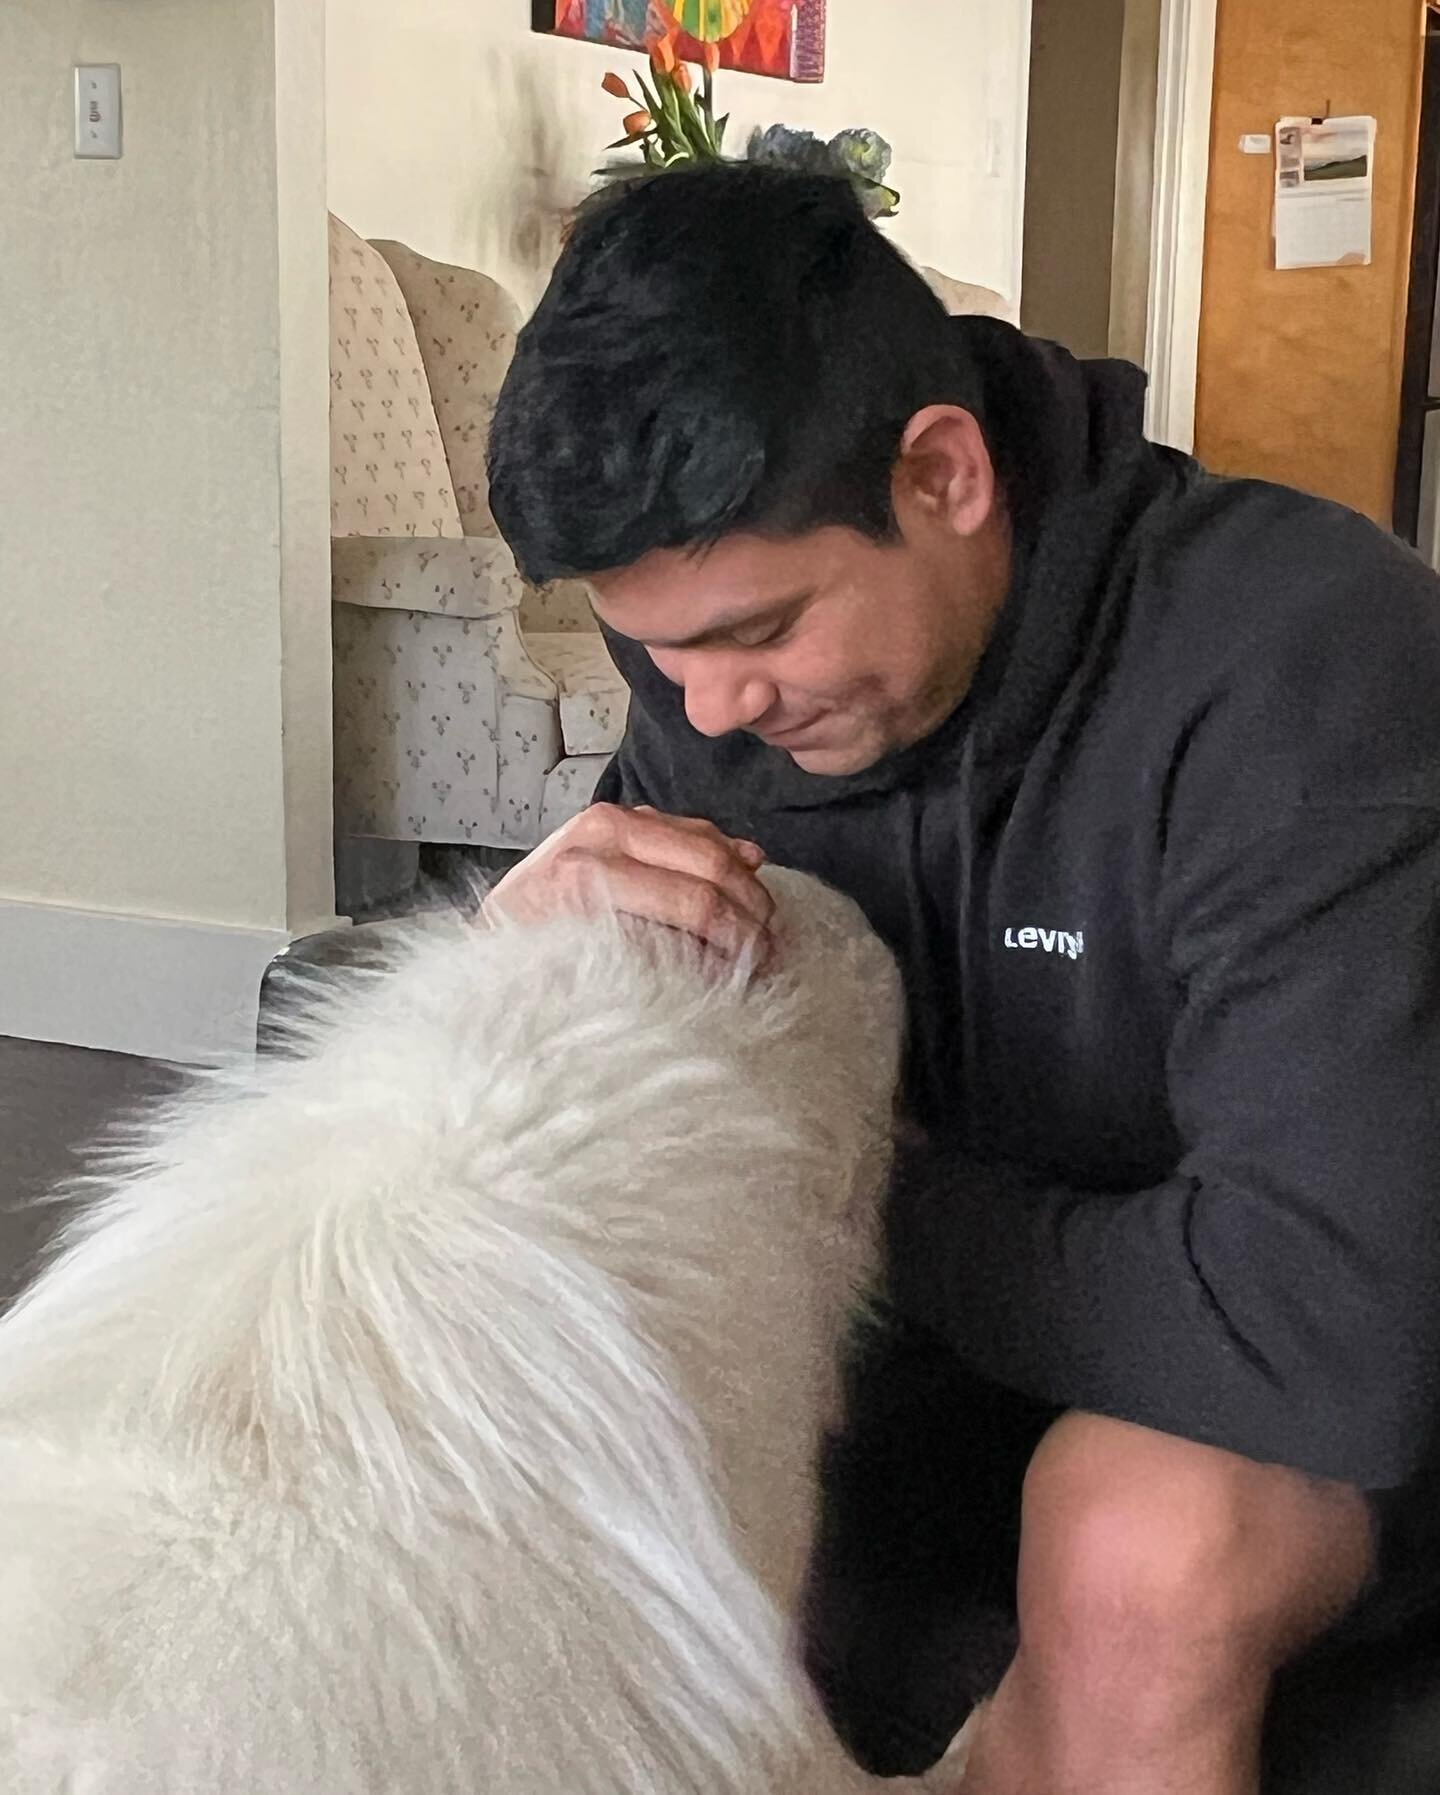 Winter has been fostered!  He was rescued by @sfsamoyedrescue and the good people there. He is now heading to a board-and-train in Modesto to help him learn more and prepare him in training for his forever home.  We need your help!  I&rsquo;m raising